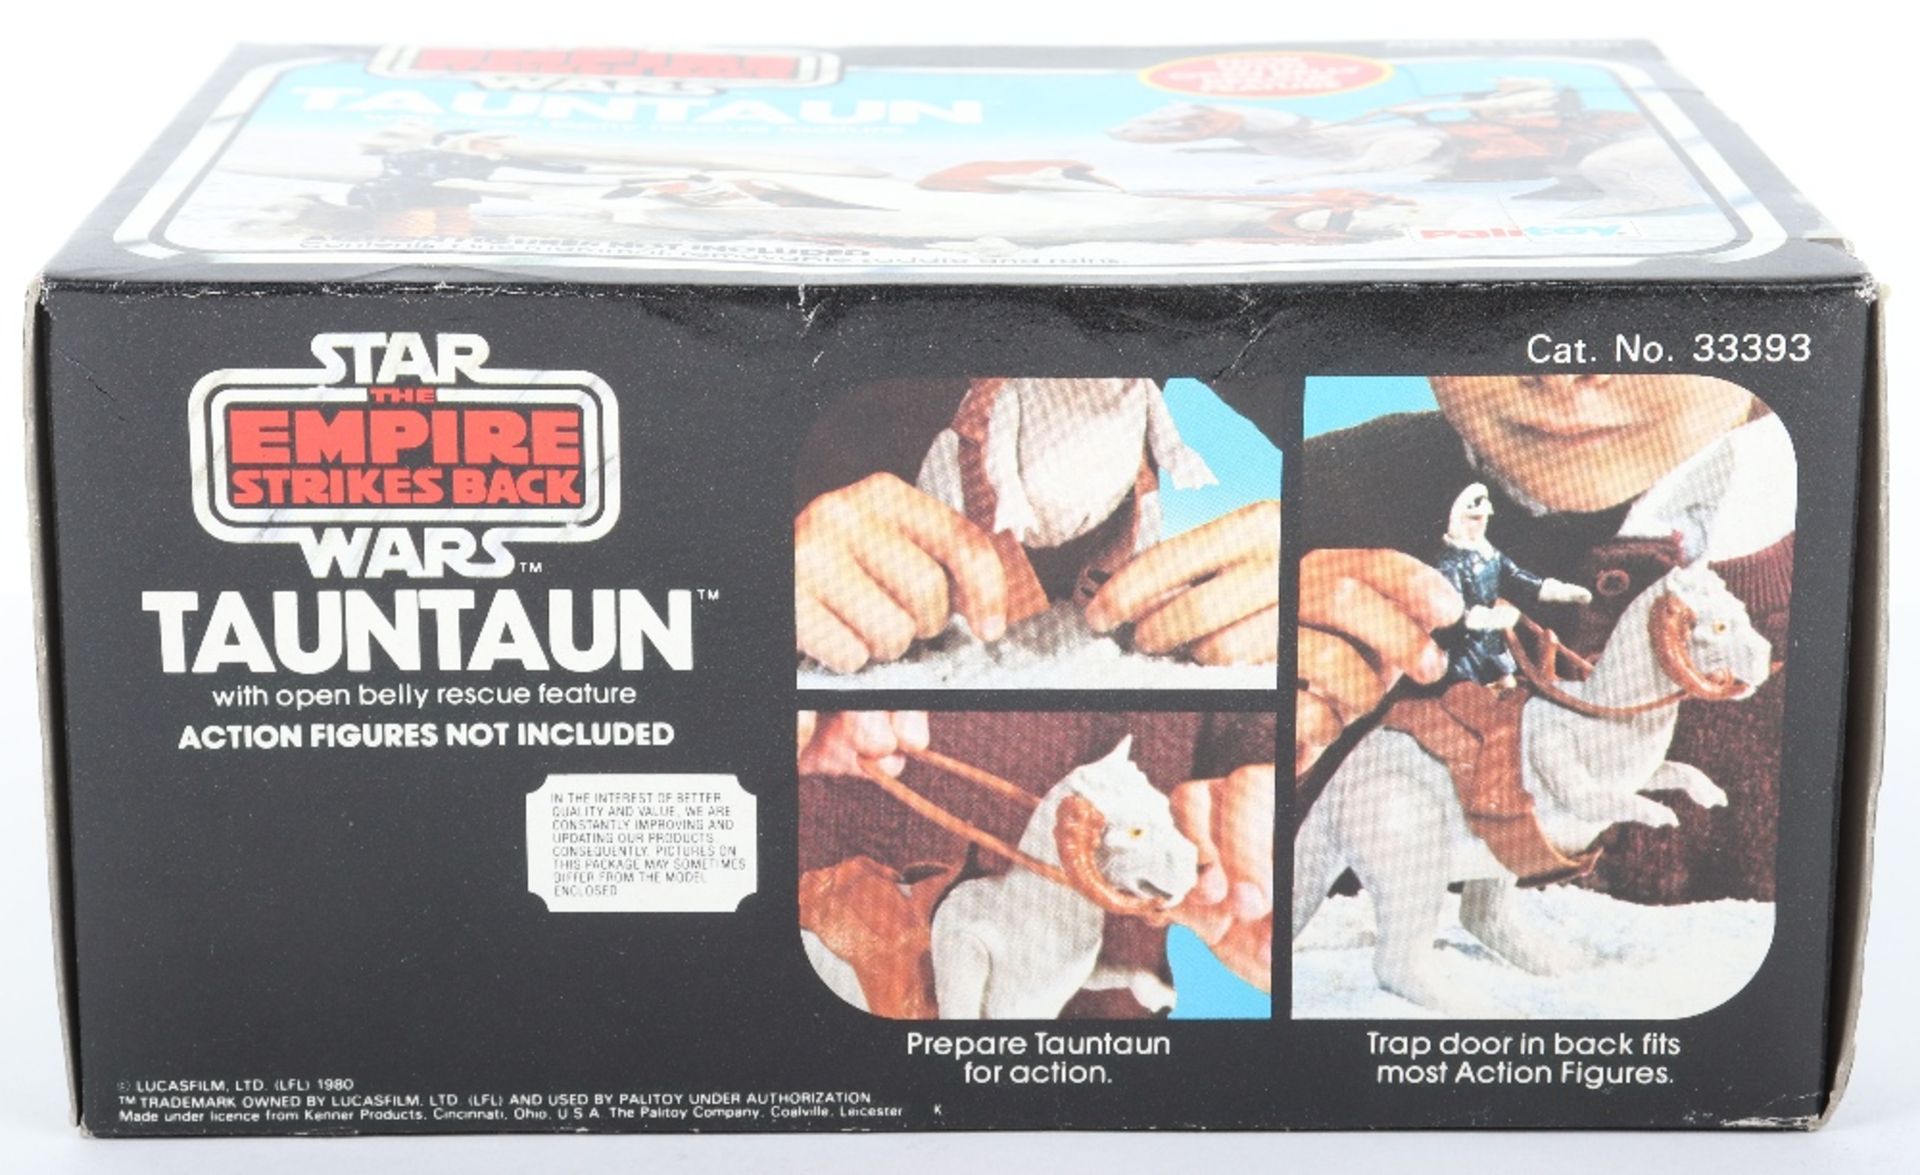 Boxed Palitoys Star Wars The Empire Strikes Back Tauntaun - Image 5 of 6